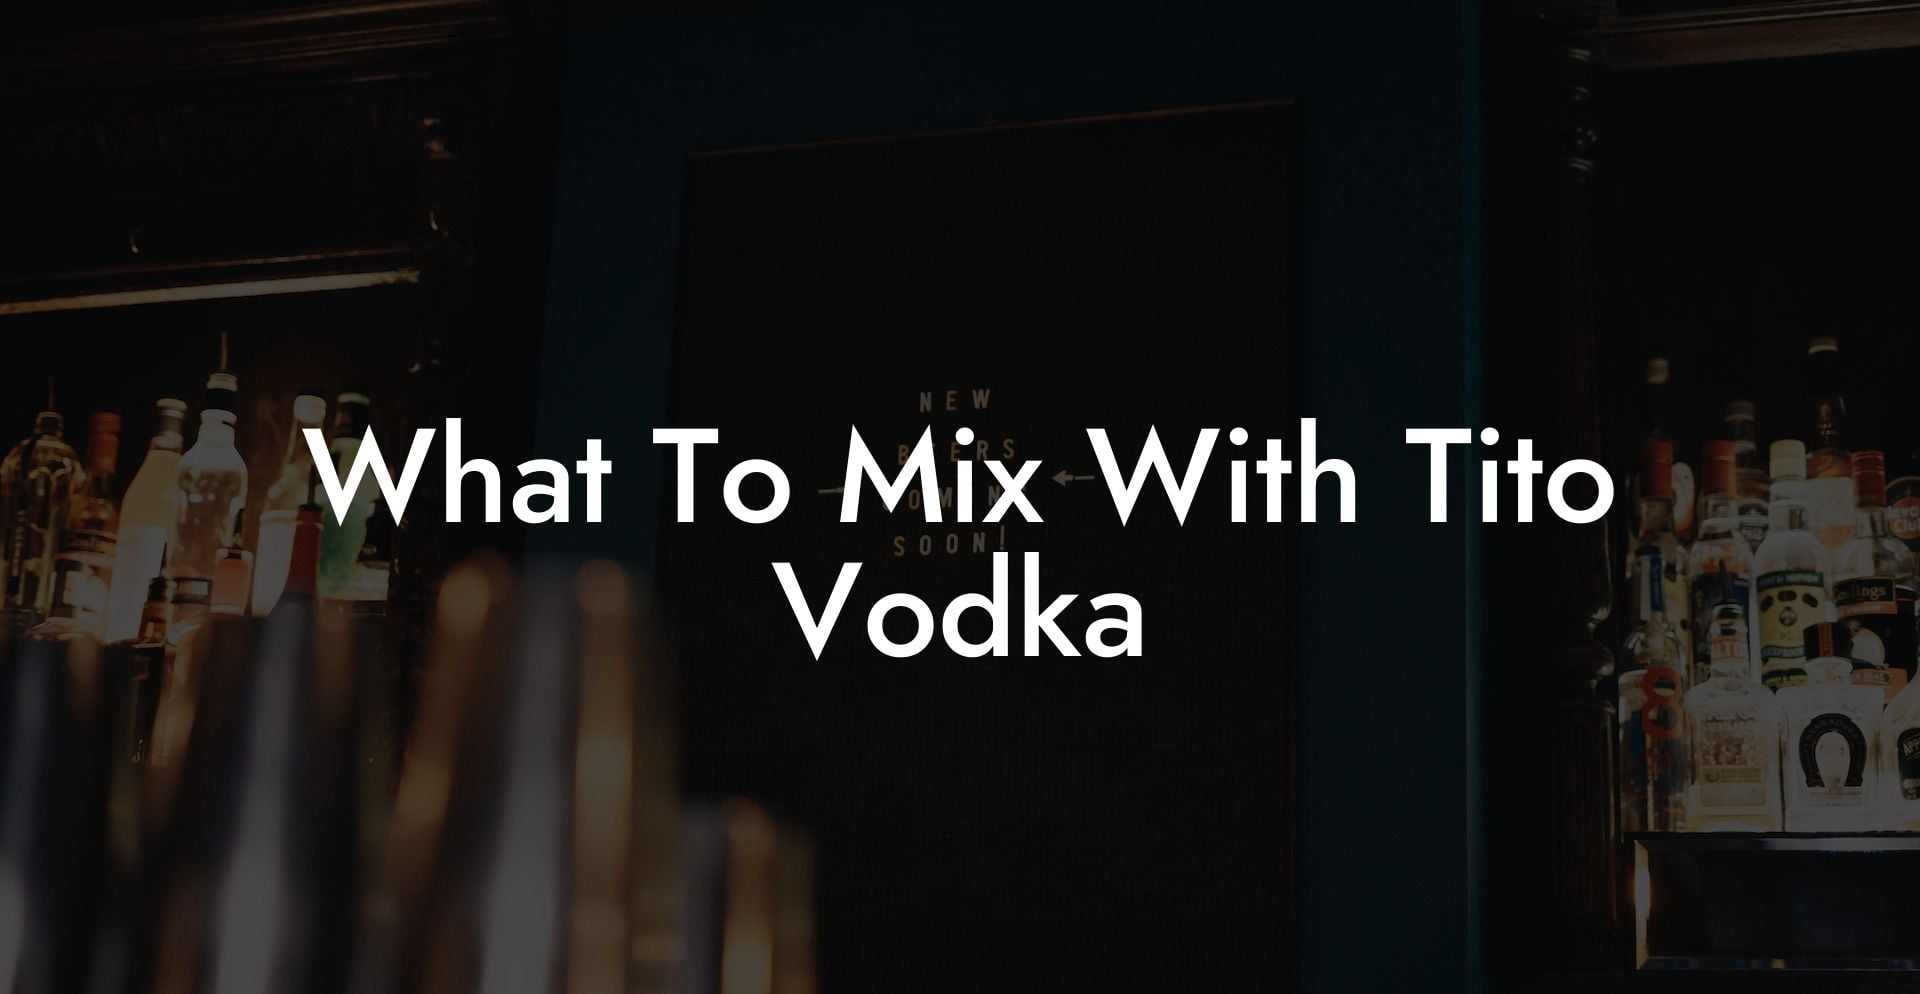 What To Mix With Tito Vodka